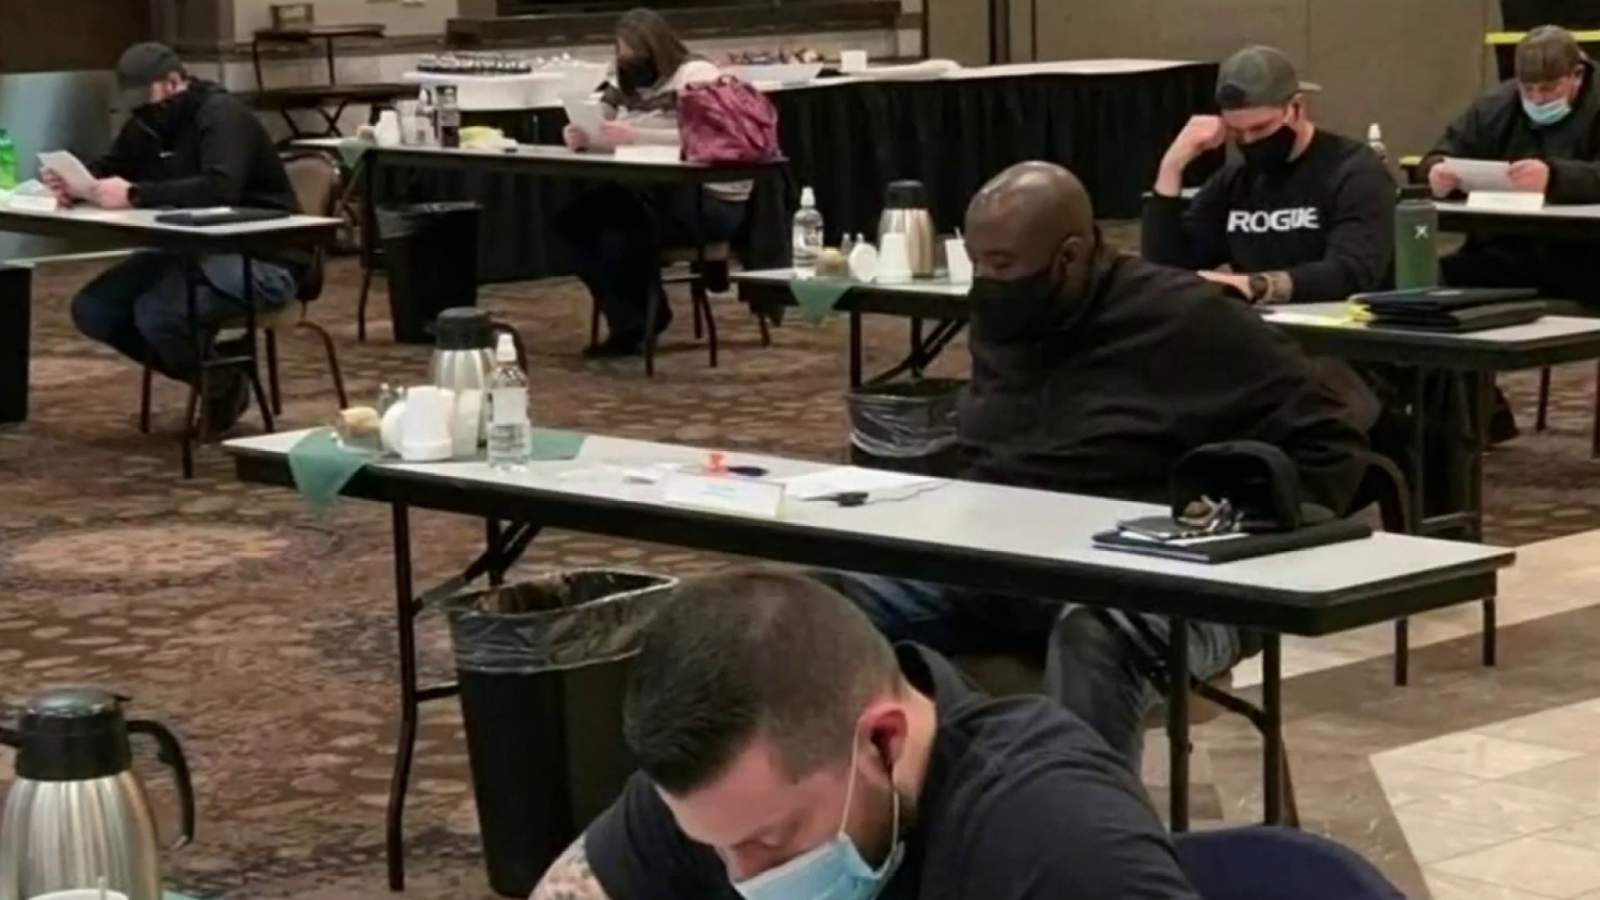 Detroit officers receive training on how to tell when someone is experiencing a mental health crisis